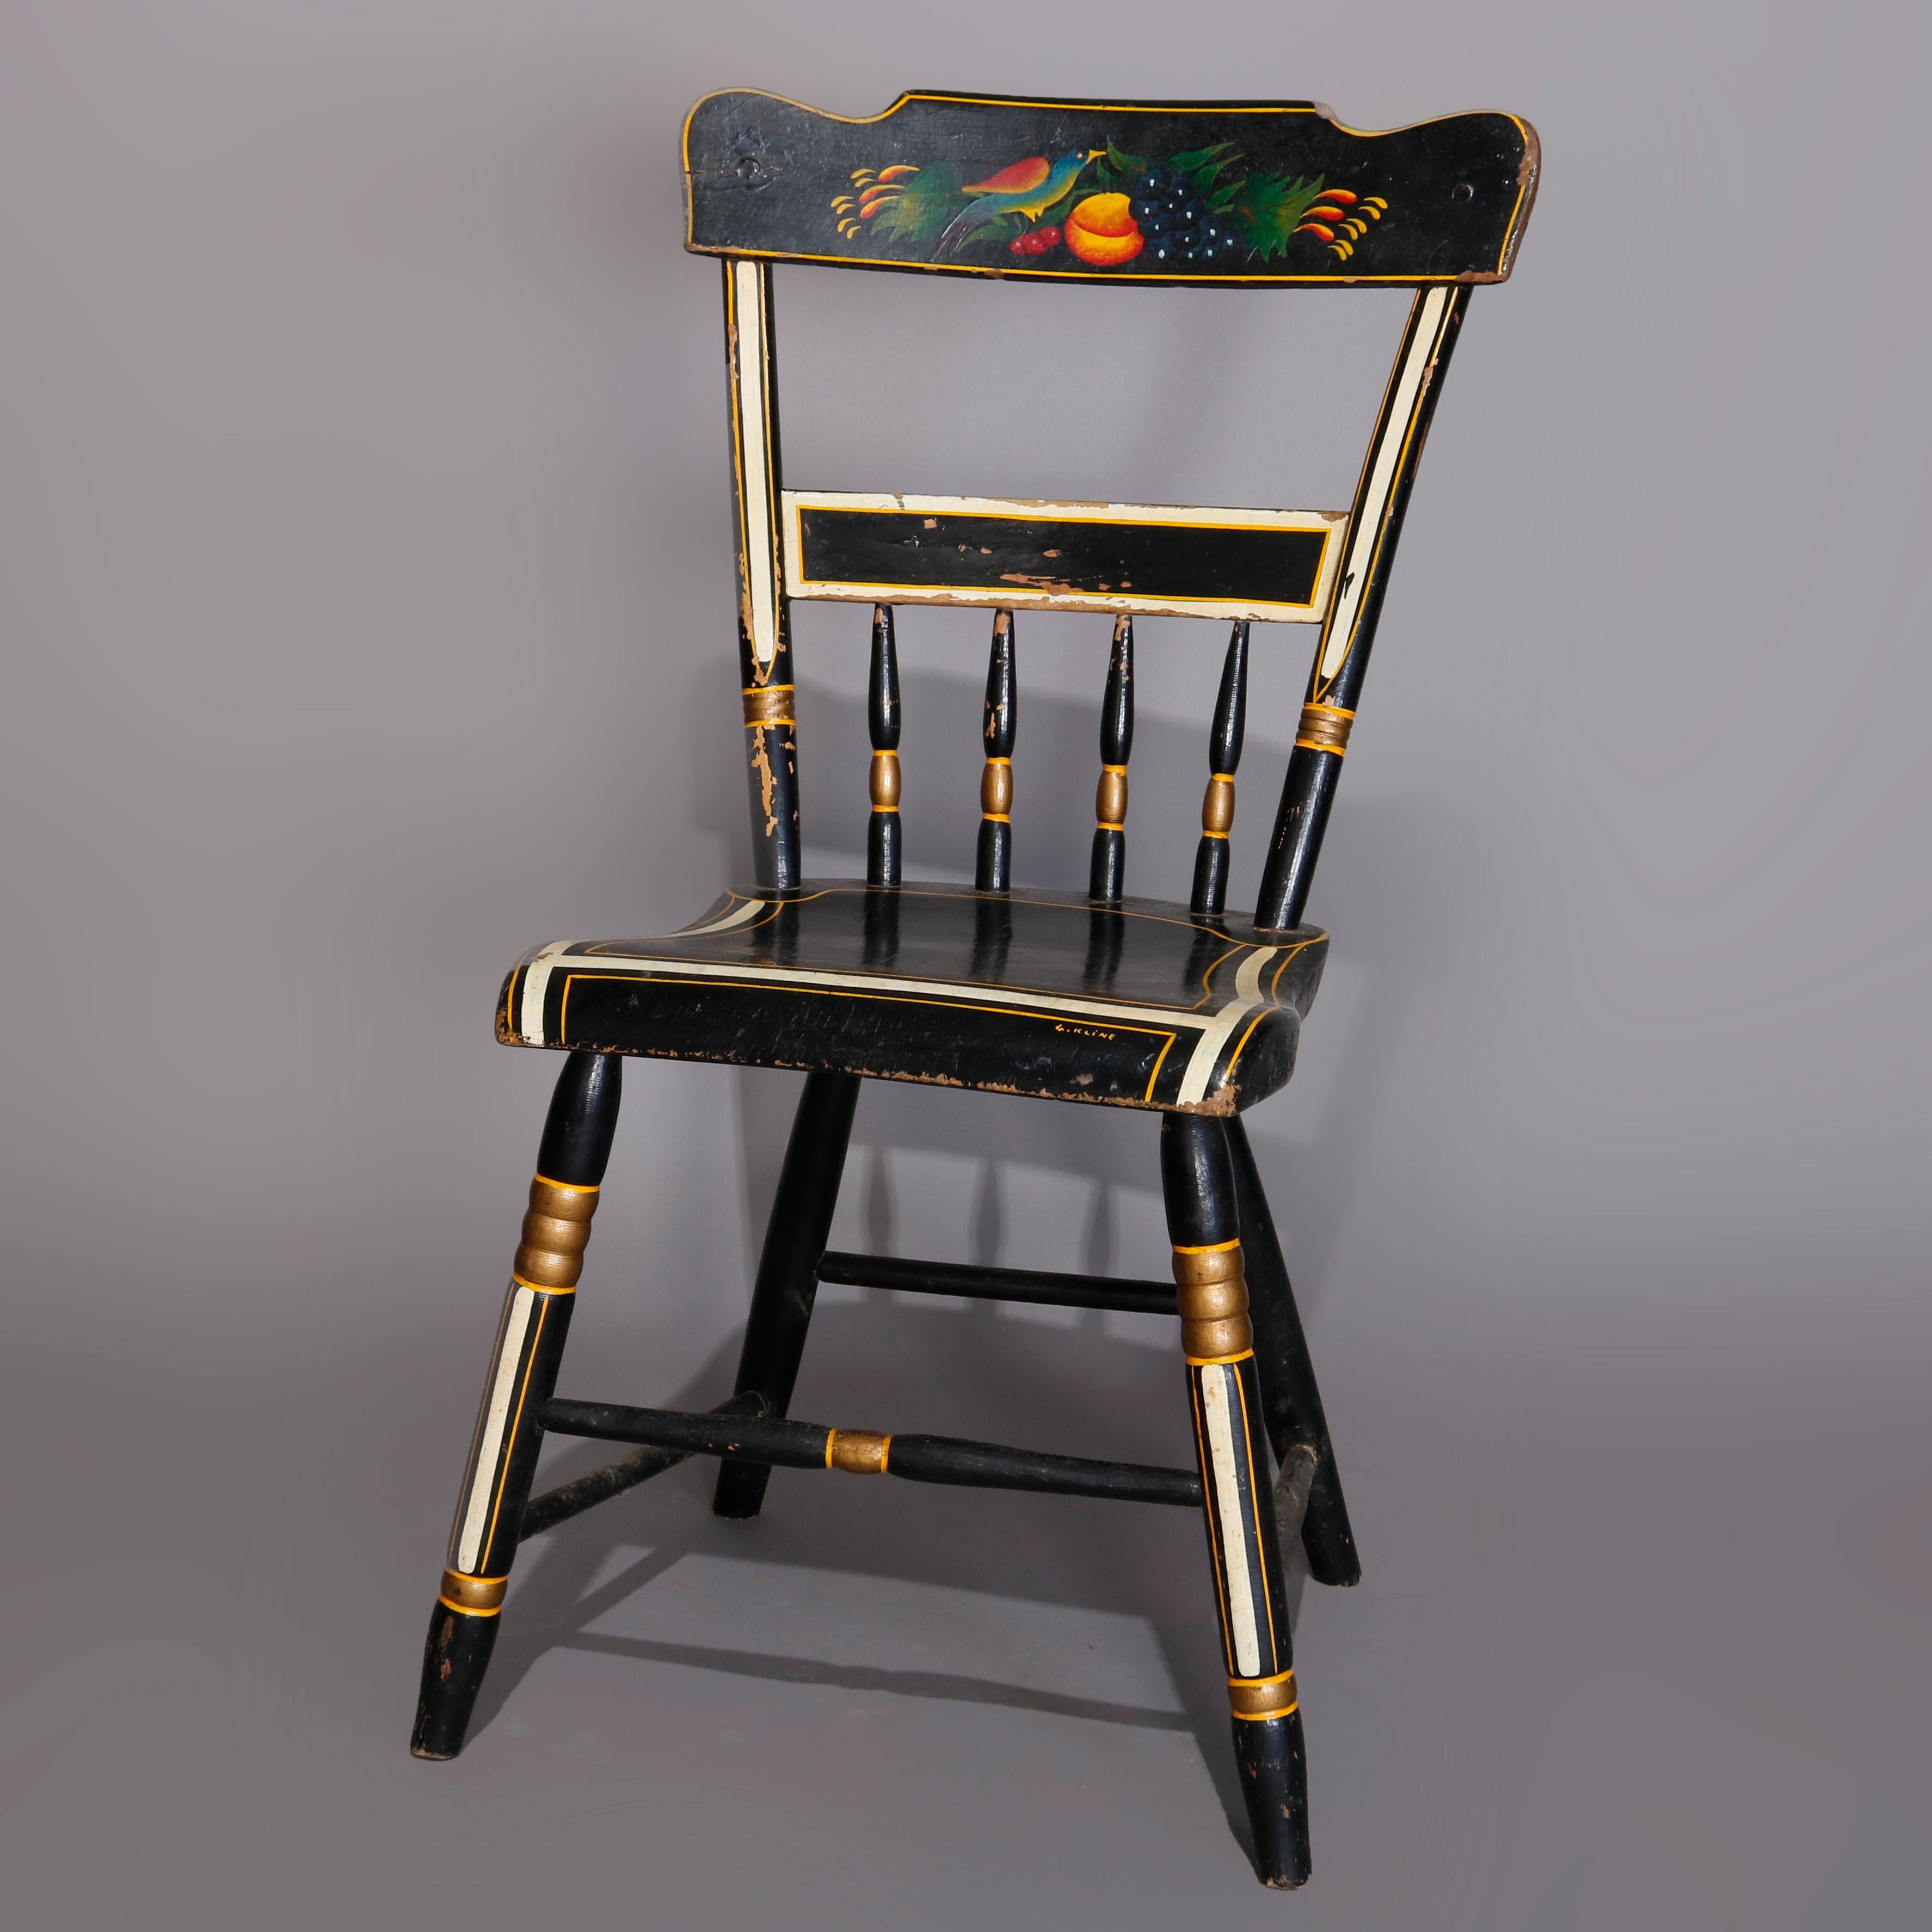 An antique set of four Hitchcock School side chairs offer ebonized finish with backs having hand painted fruit still life with bird over paint and gilt decorated plank seats and legs, 19th century

***DELIVERY NOTICE – Due to COVID-19 we are